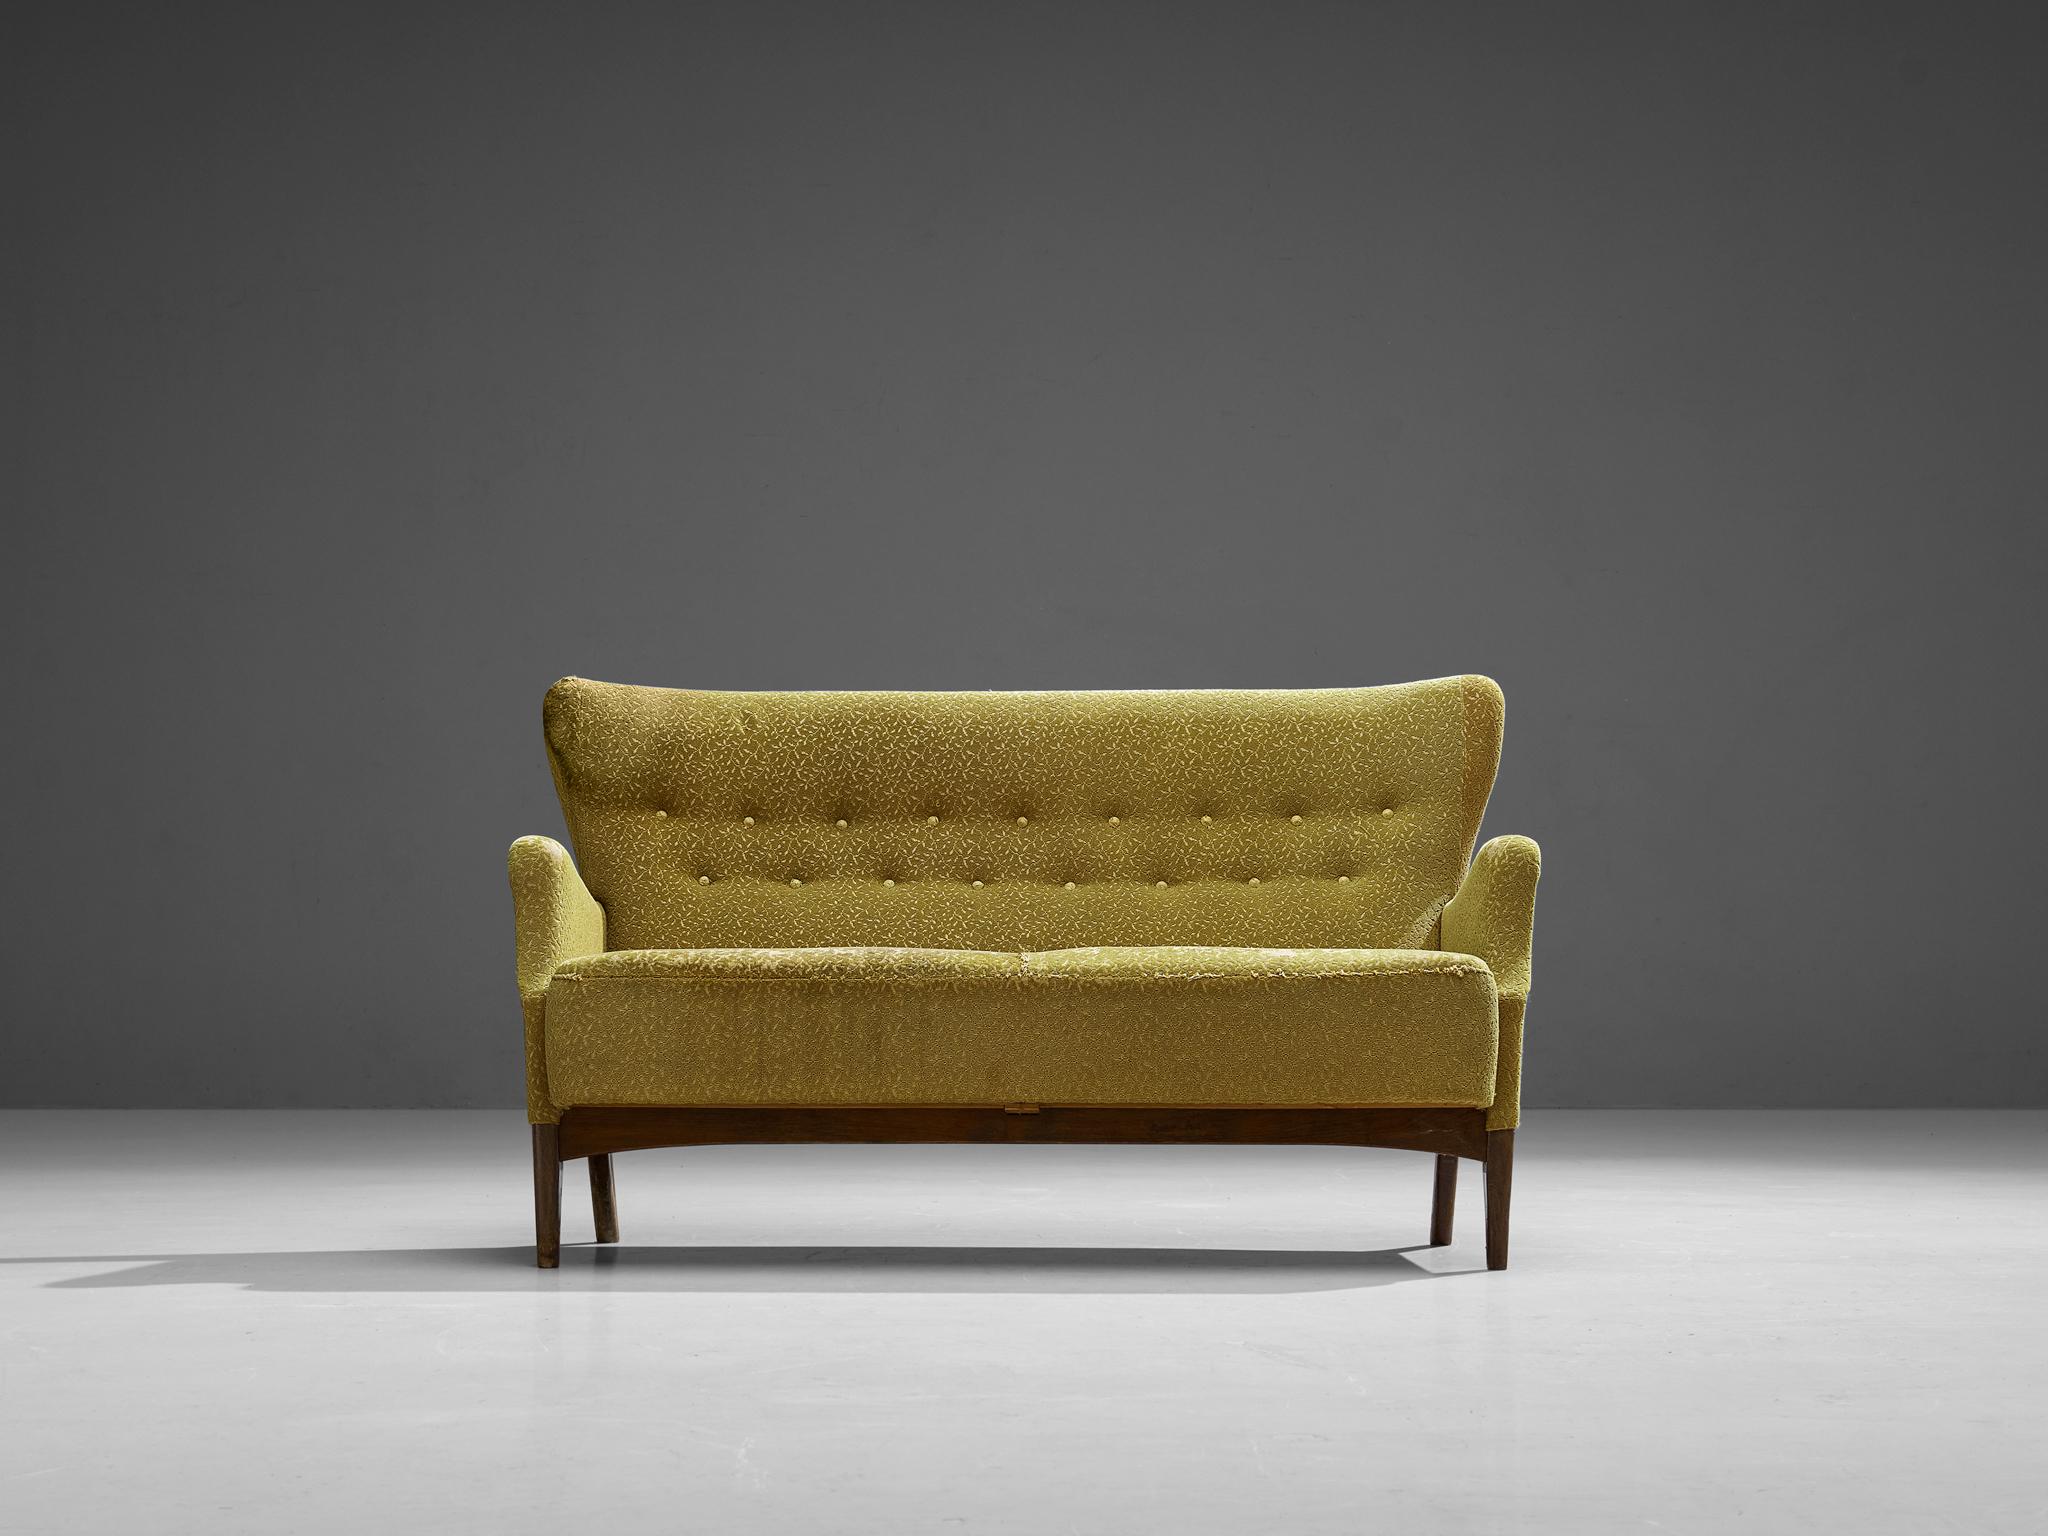 Sofa, fabric, stained wood, Denmark, 1940s.

This Danish sofa shows elegant curves and beautiful lines, especially on the folded armrests. The tufted back with buttons contributes to the classical Scandinavian style, and strongly resembles the style